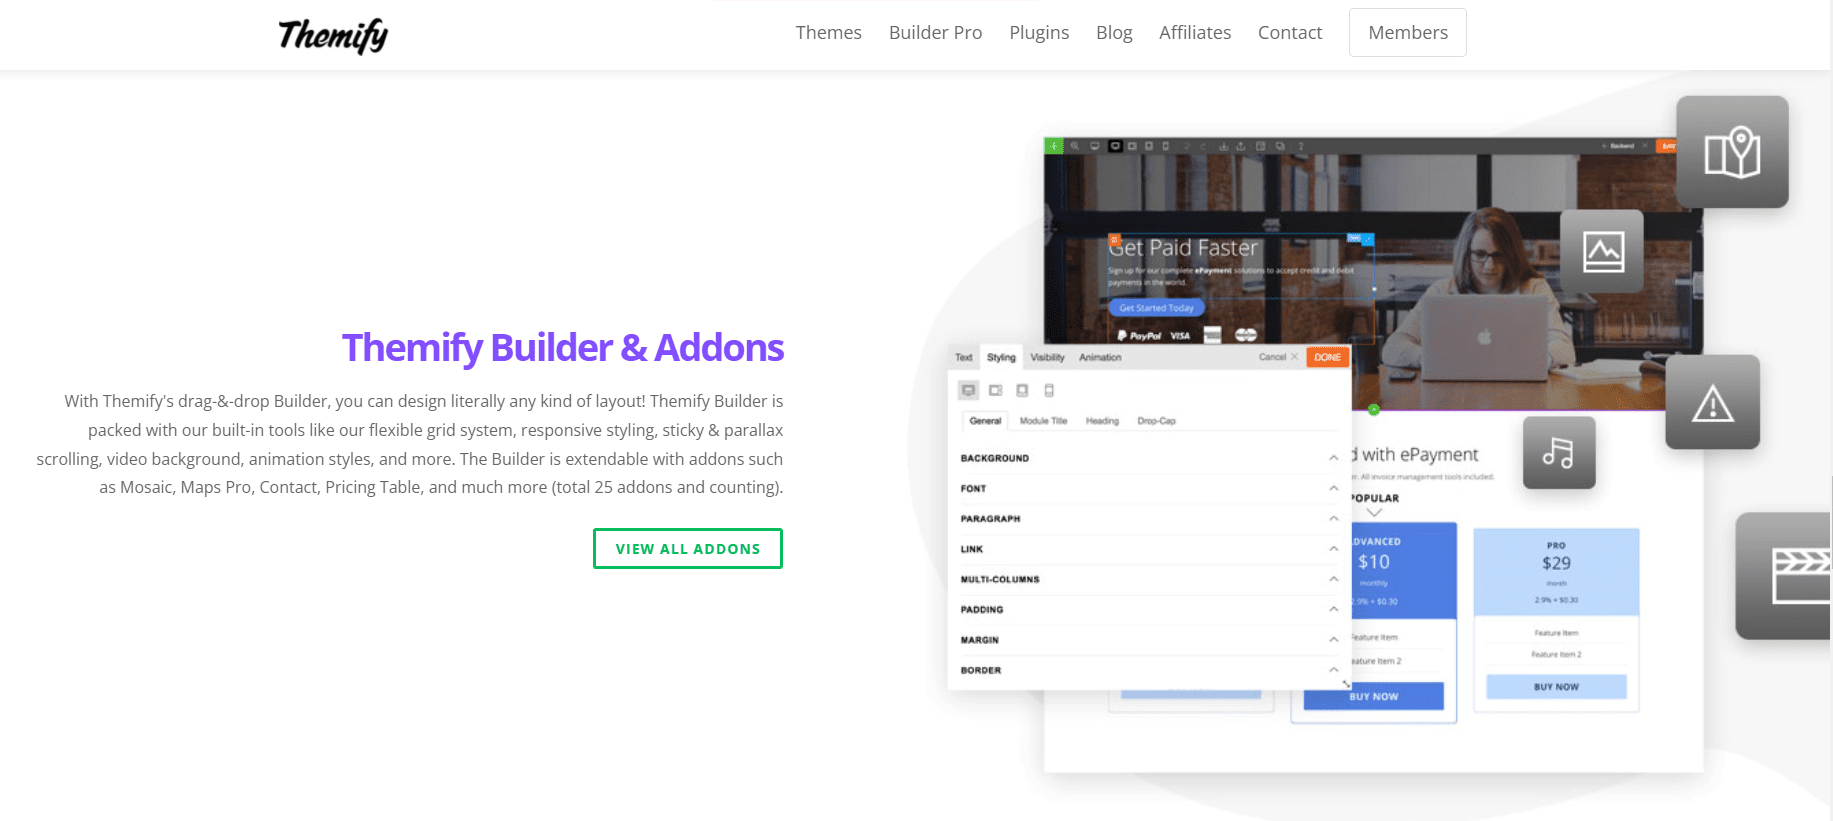 Themify Builder Overview